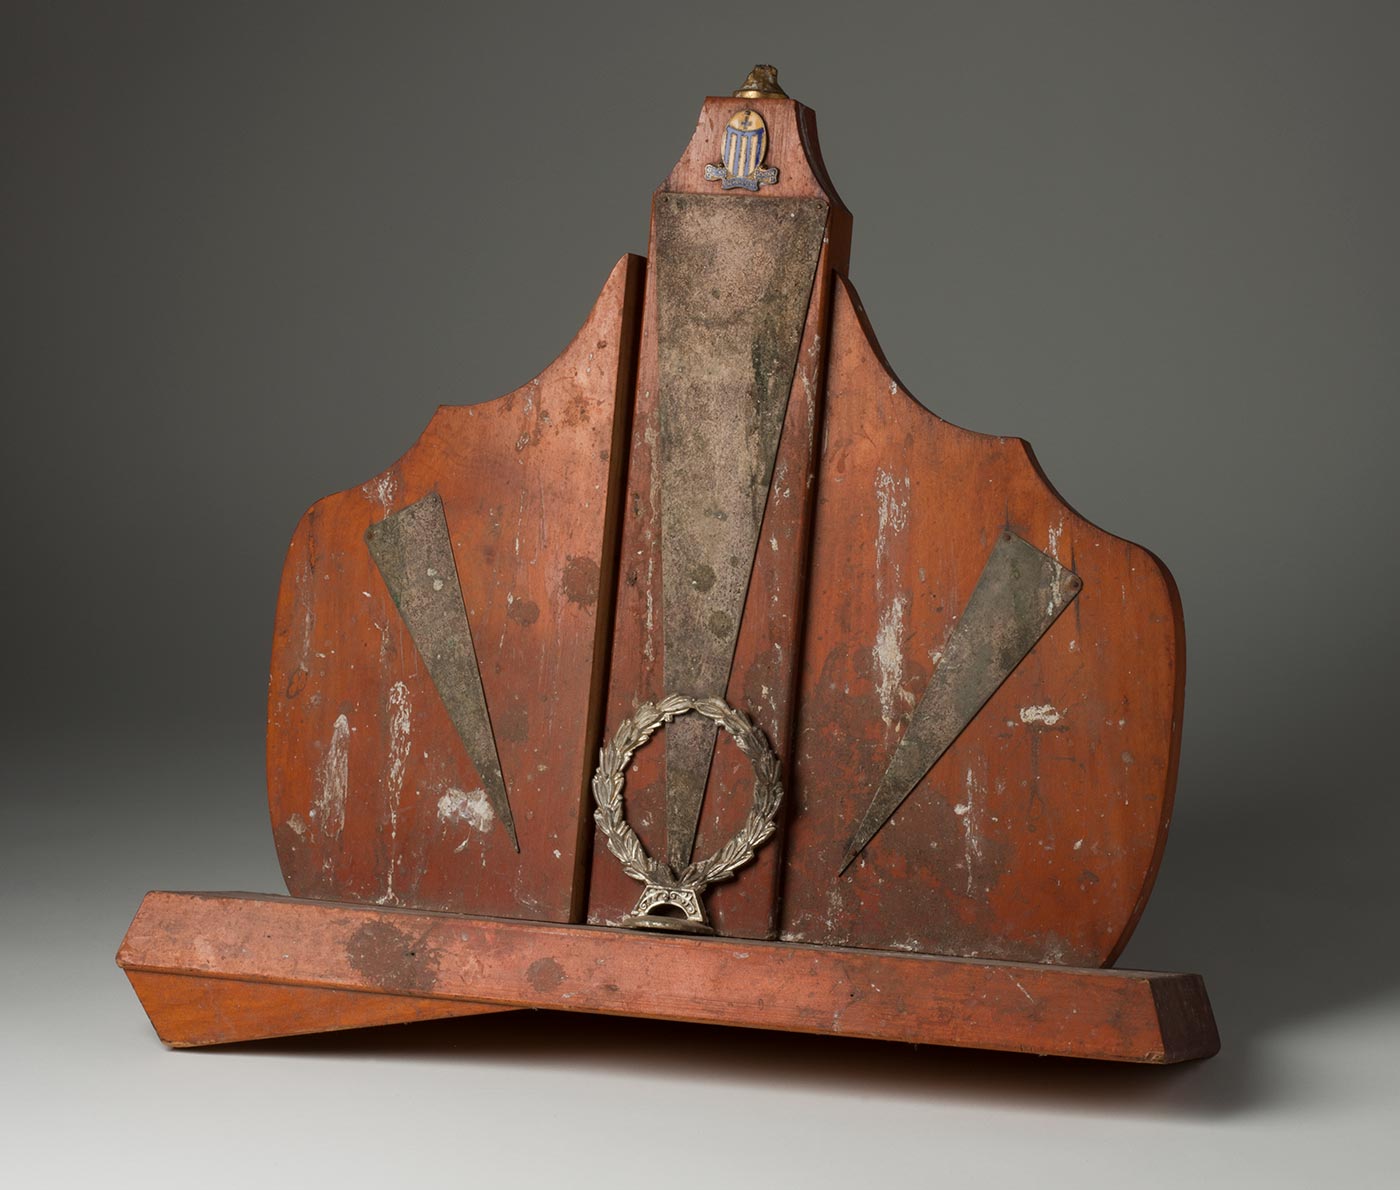 Wooden and metal trophy in a semi-shield shape with a laurel wreath in the centre. At the top there is a blue and yellow striped enamel badge with the words 'O.L.M. PREPARATORY SCHOOL' Remnants of bird droppings streak the trophy. - click to view larger image